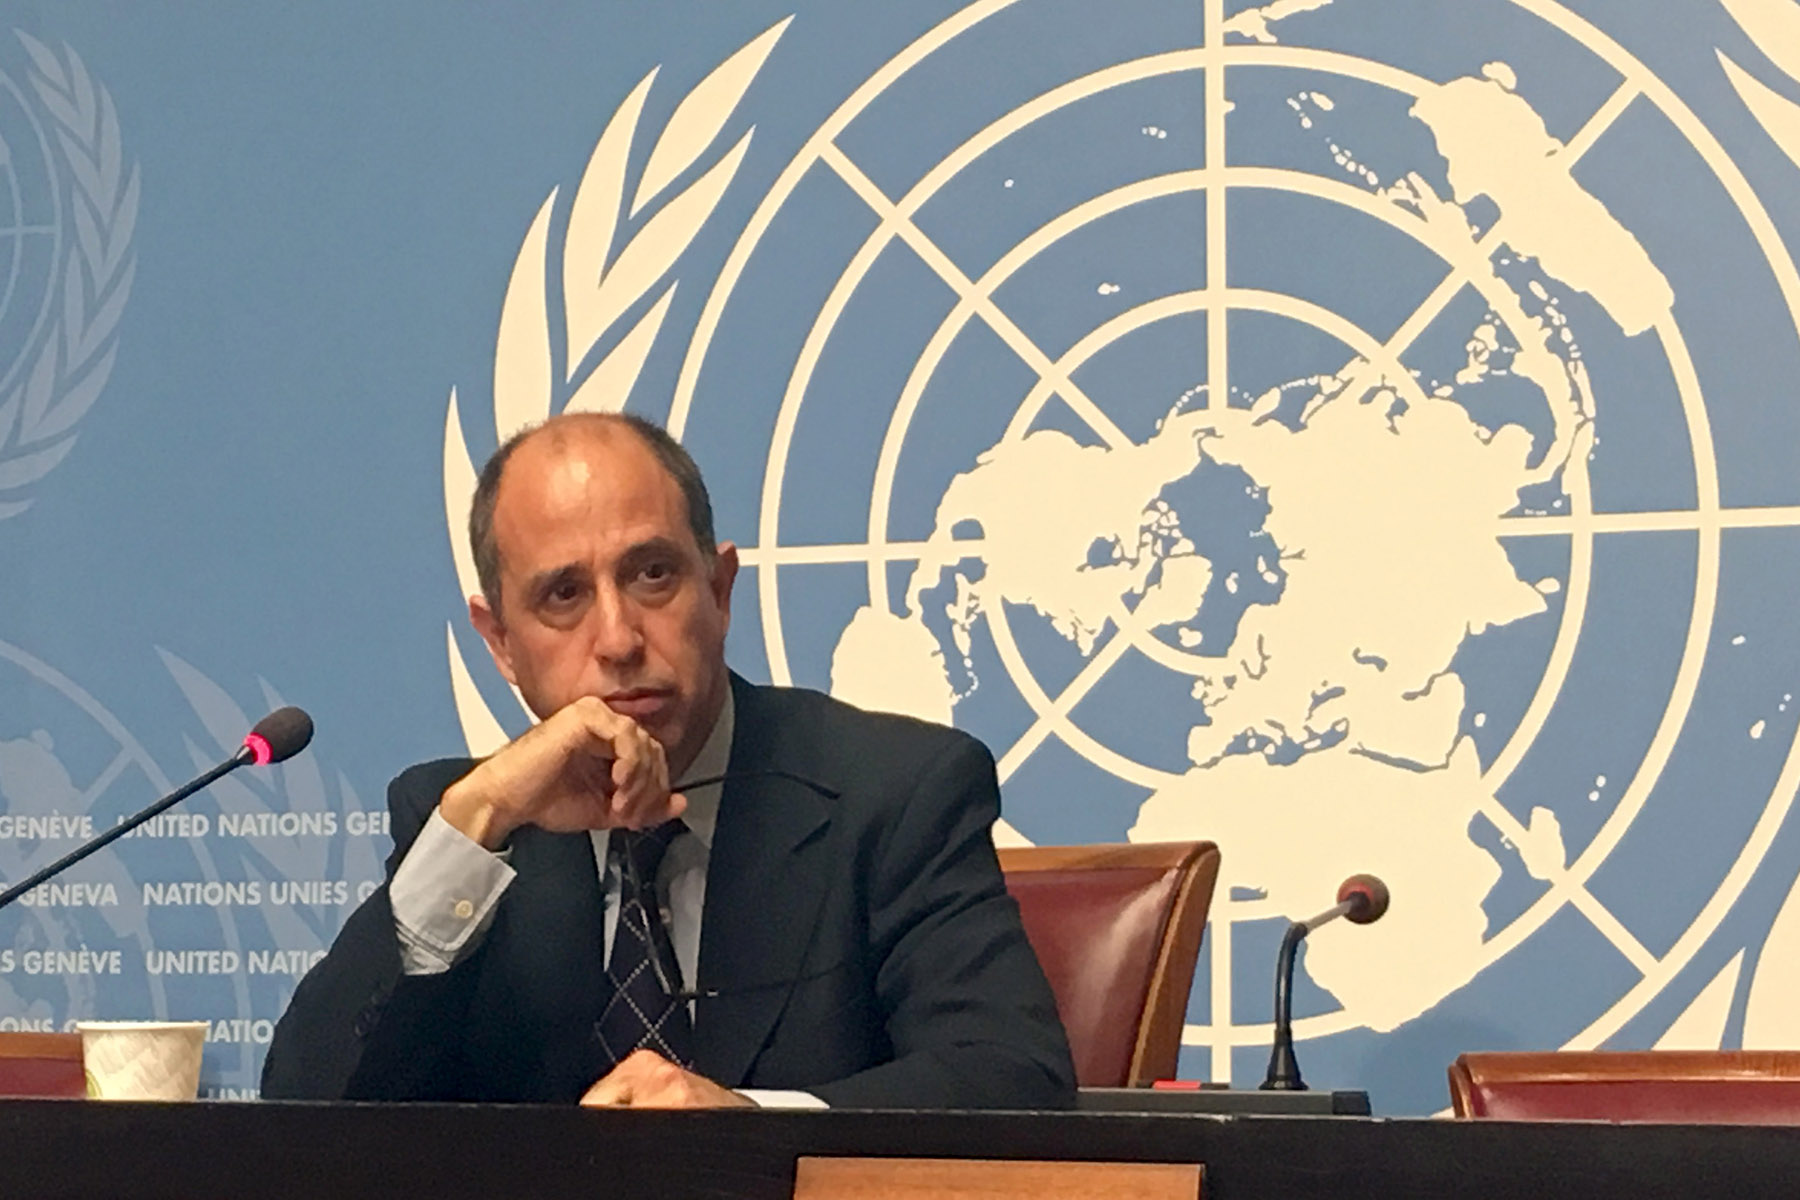 UN special rapporteur Tomas Ojea Quintana stares to someone behind the camera during a 2018 summit of the UN.